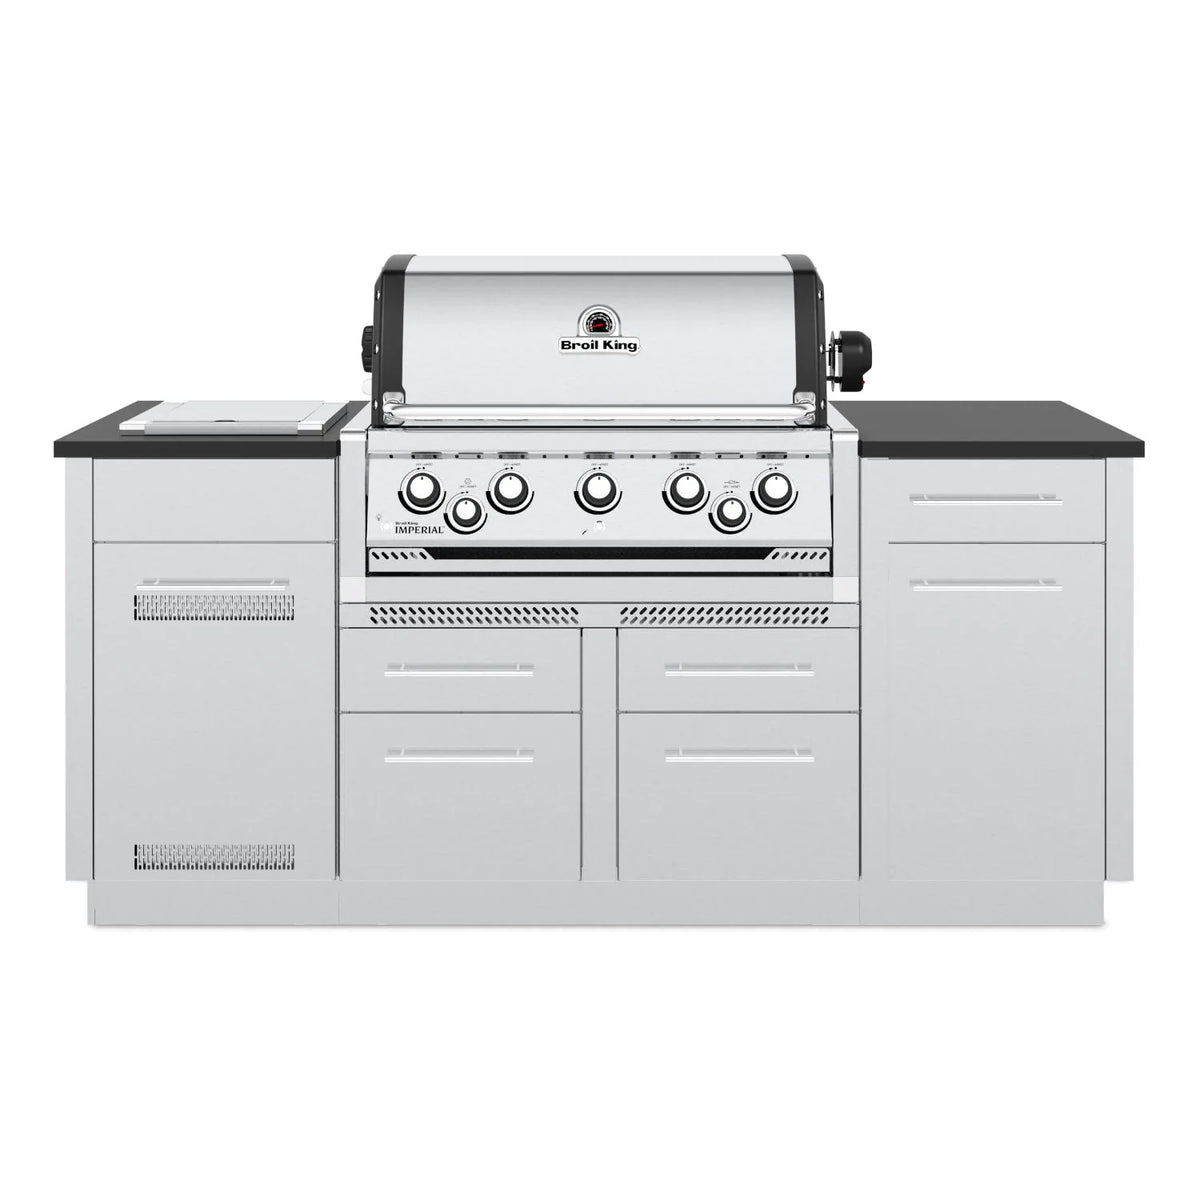 Broil King 896844 Imperial S 590i 5-Burner Propane Gas Grill Center With Rotisserie &amp; Side Burner - Stainless Steel